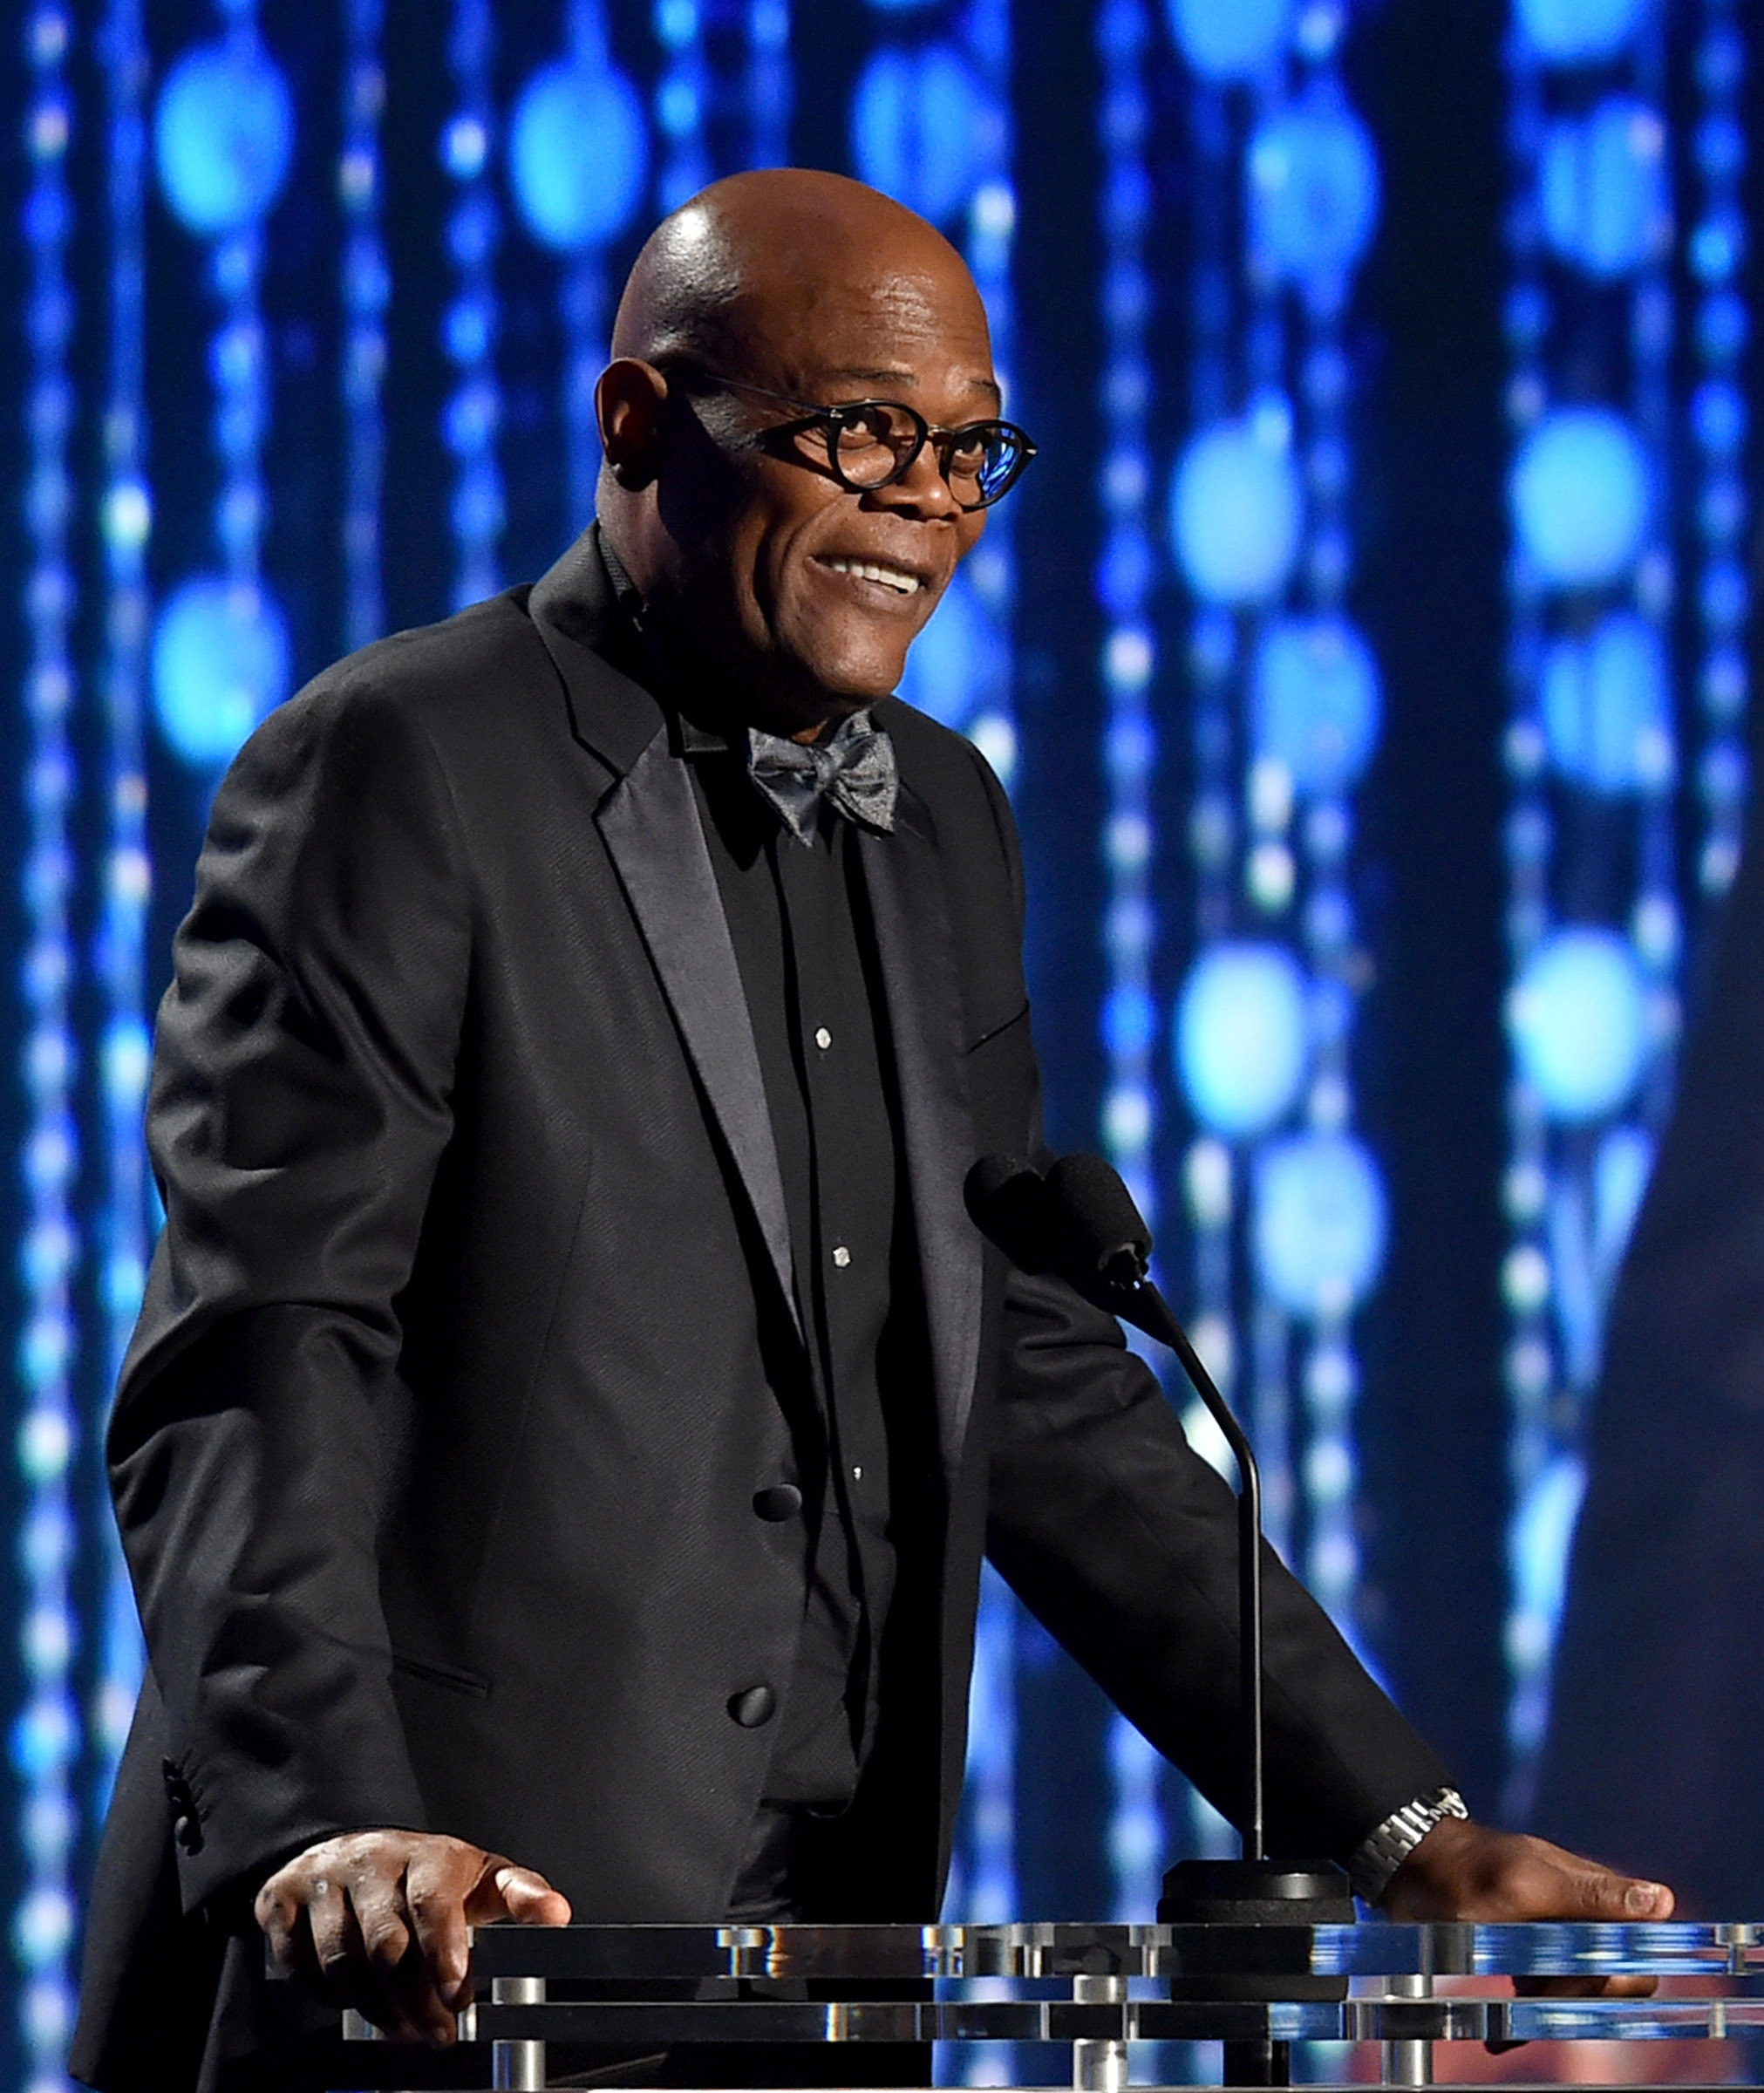 HOLLYWOOD, CA - NOVEMBER 14:  Actor Samuel L. Jackson speaks onstage during the Academy of Motion Picture Arts and Sciences' 7th annual Governors Awards at The Ray Dolby Ballroom at Hollywood & Highland Center on November 14, 2015 in Hollywood, California.  (Photo by Kevin Winter/Getty Images)